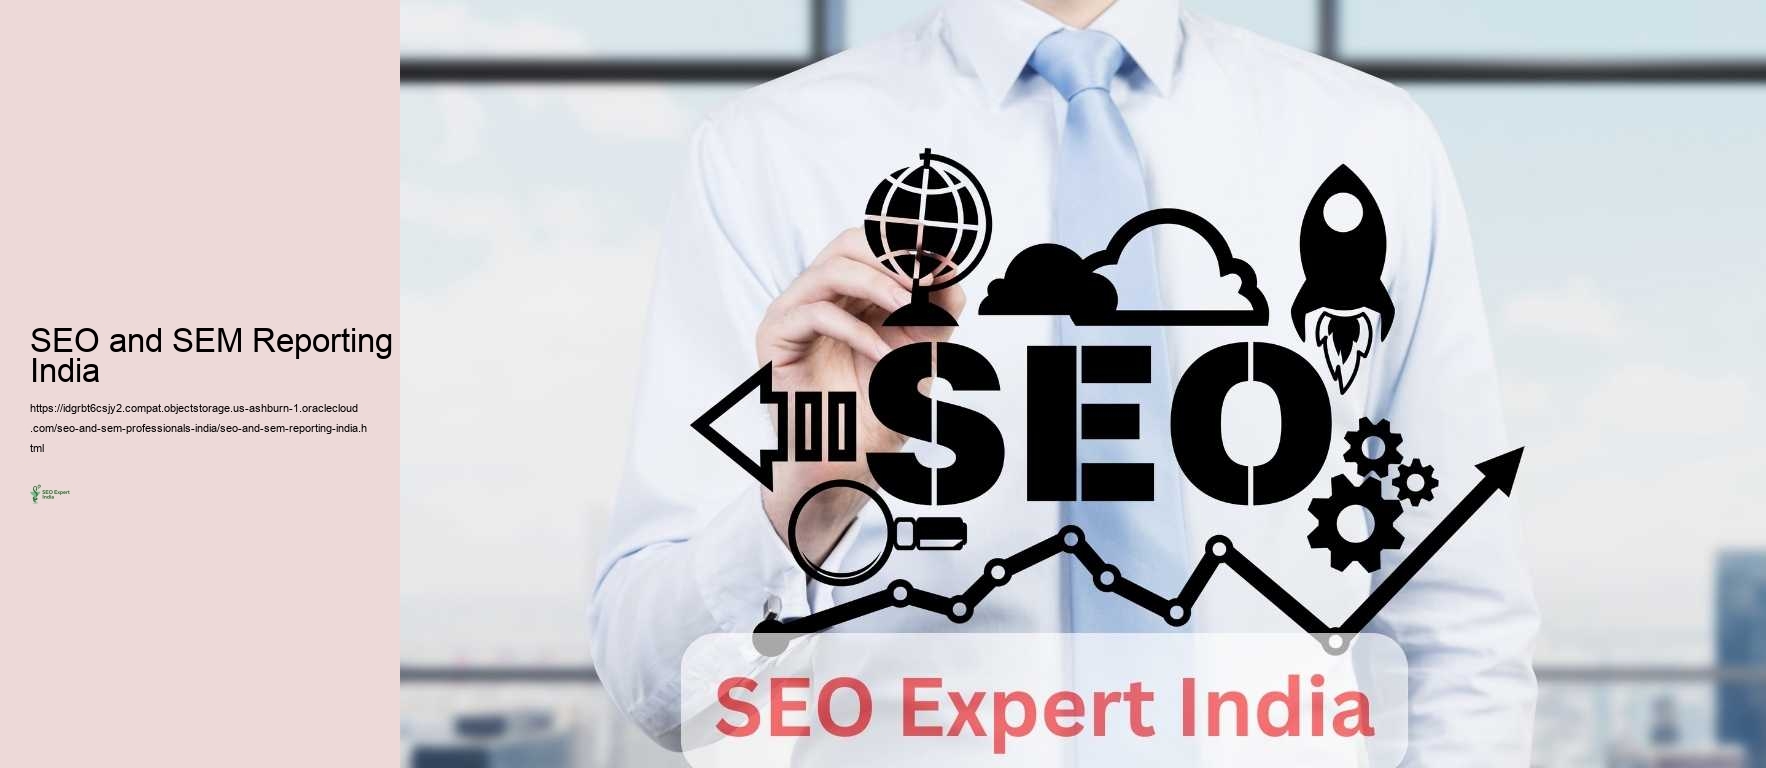 SEO and SEM Reporting India